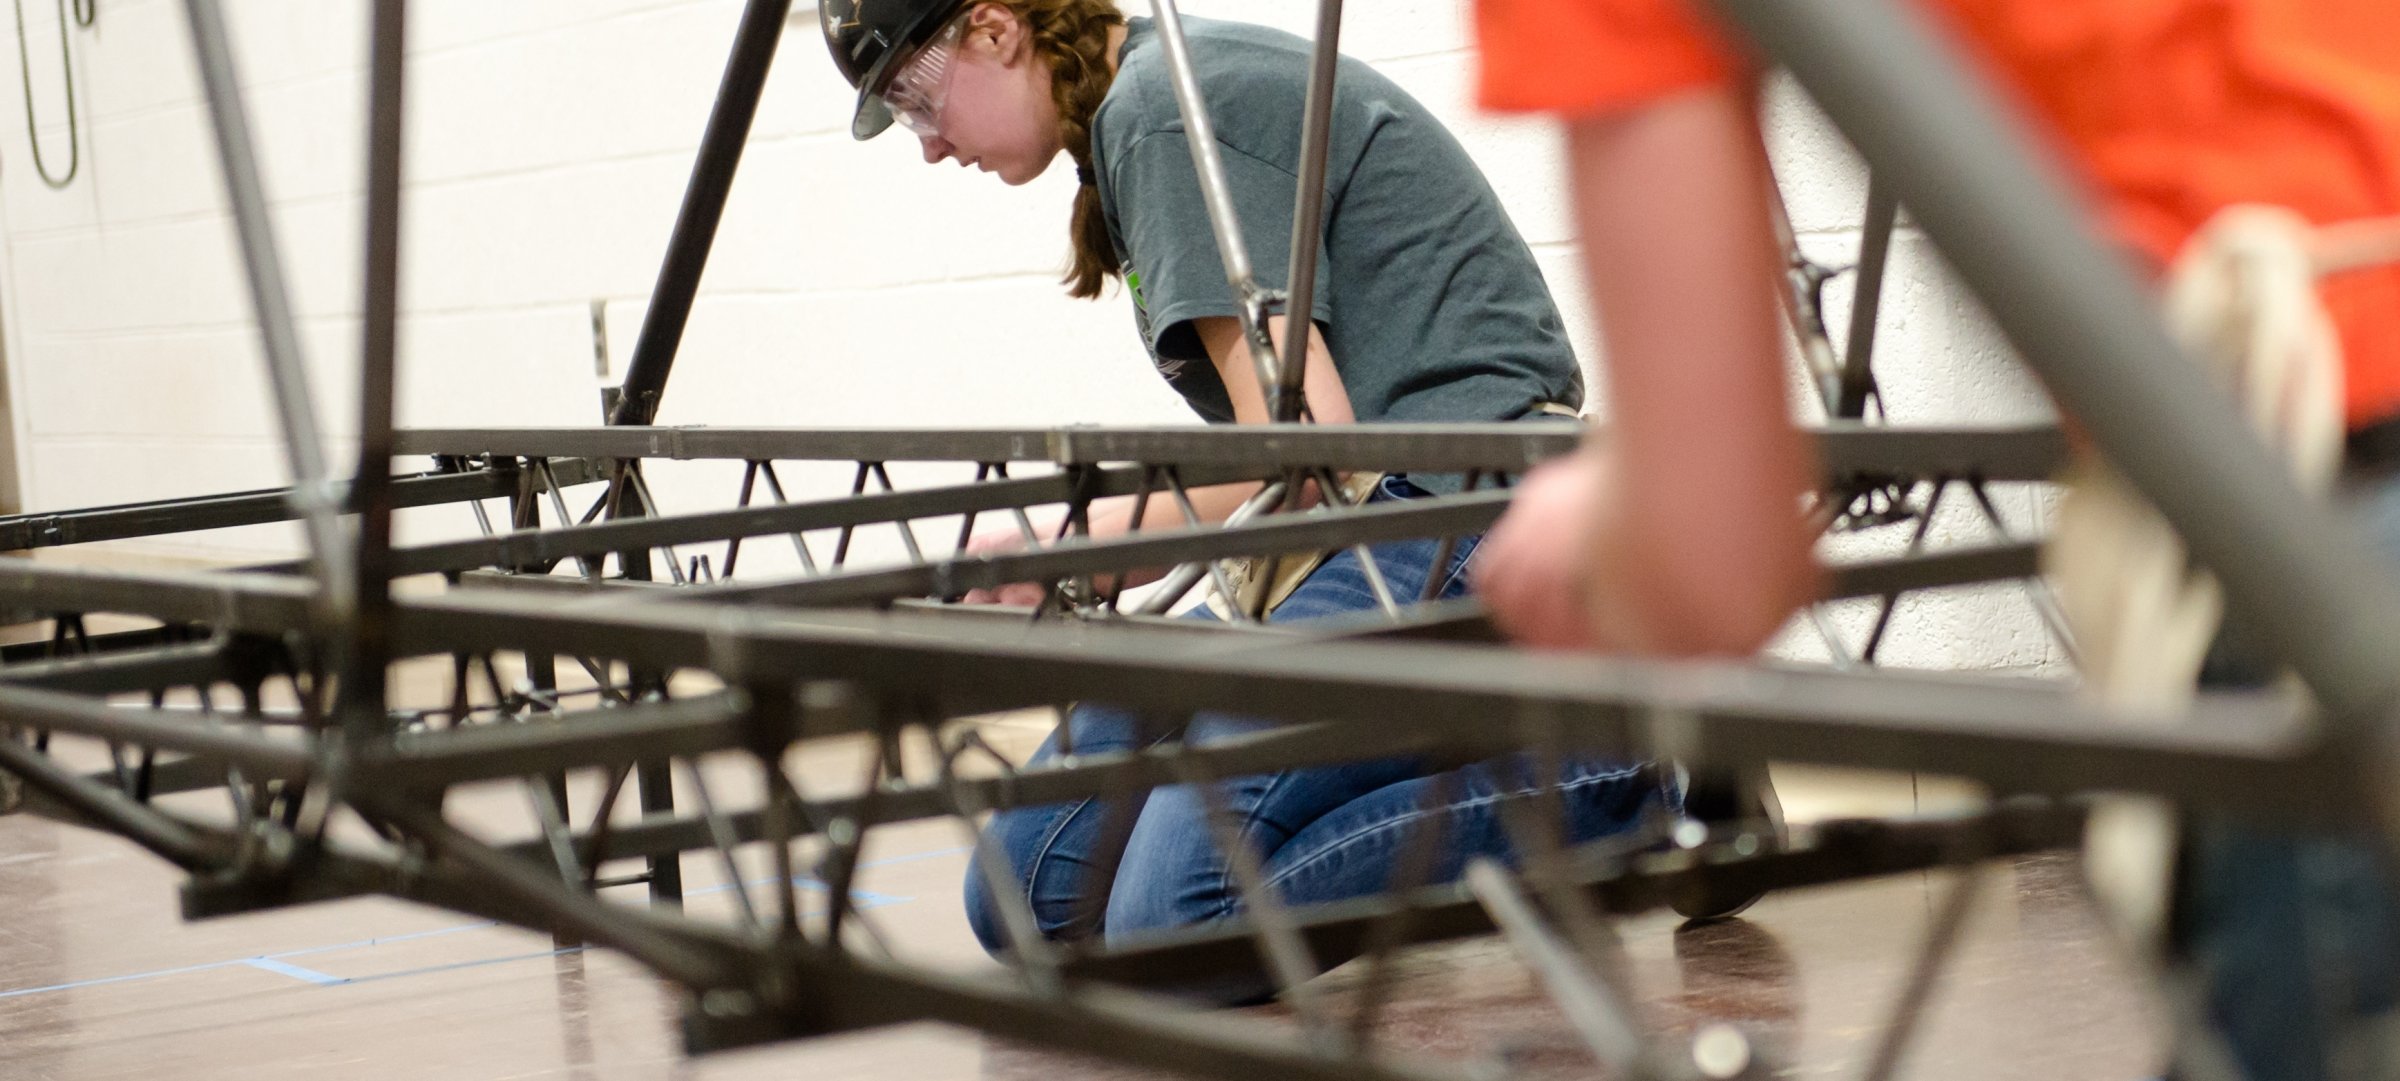 Students construction steel bridge for a competition.